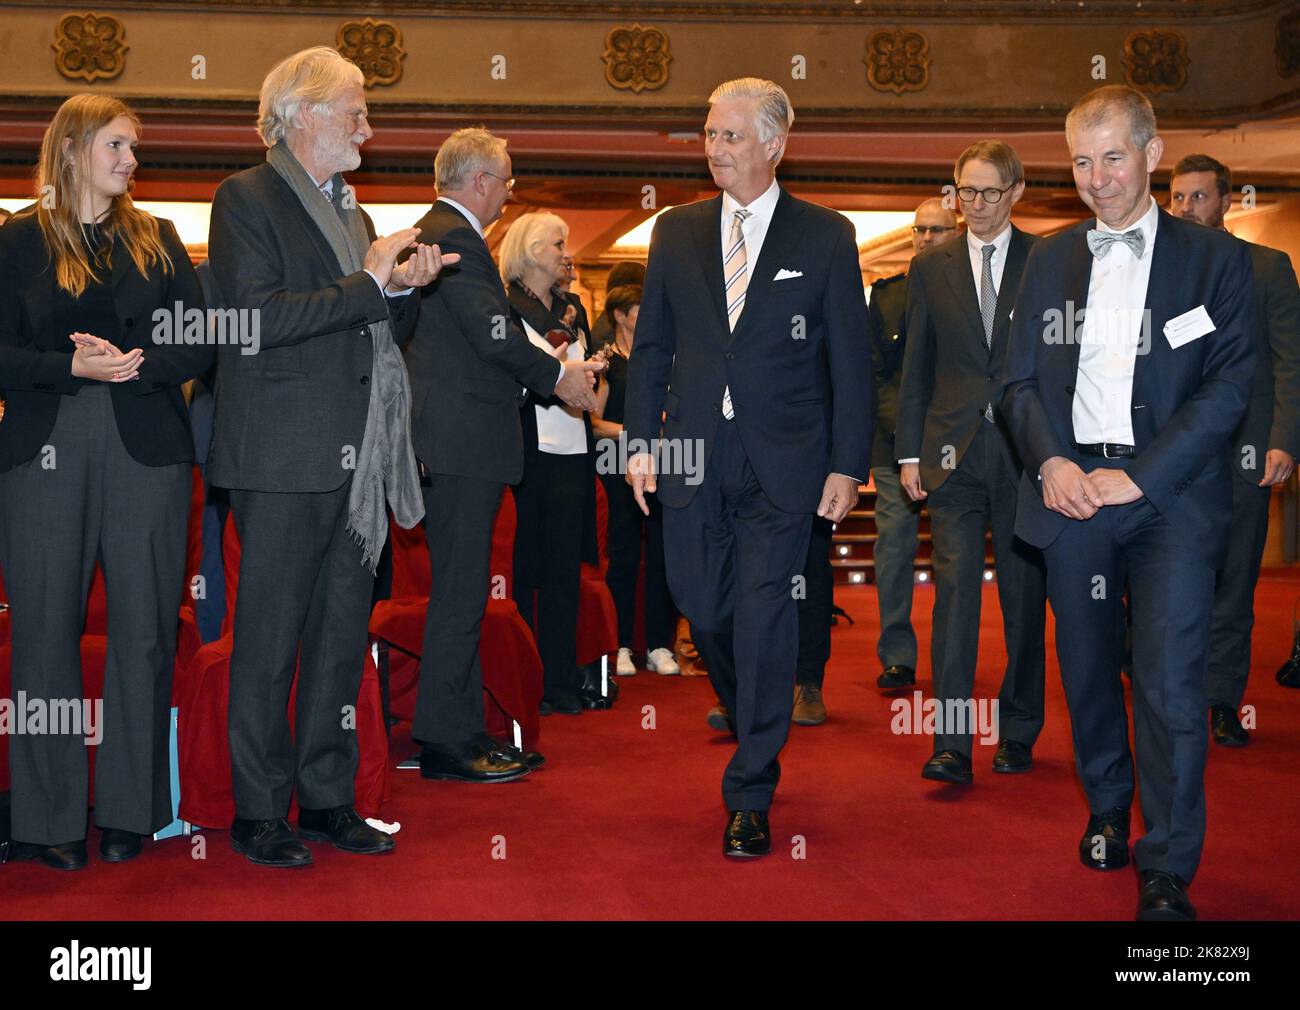 King Philippe - Filip of Belgium and Baron Marc Henneaux pictured during a royal visit to the 100th anniversary of the Solvay Conference of Chemistry, organized by chemical company Solvay, Thursday 20 October 2022 in Brussels. Solvay organizes the 'Chemistry and the Future of Society' academic session for the occasion. BELGA PHOTO ERIC LALMAND Credit: Belga News Agency/Alamy Live News Stock Photo